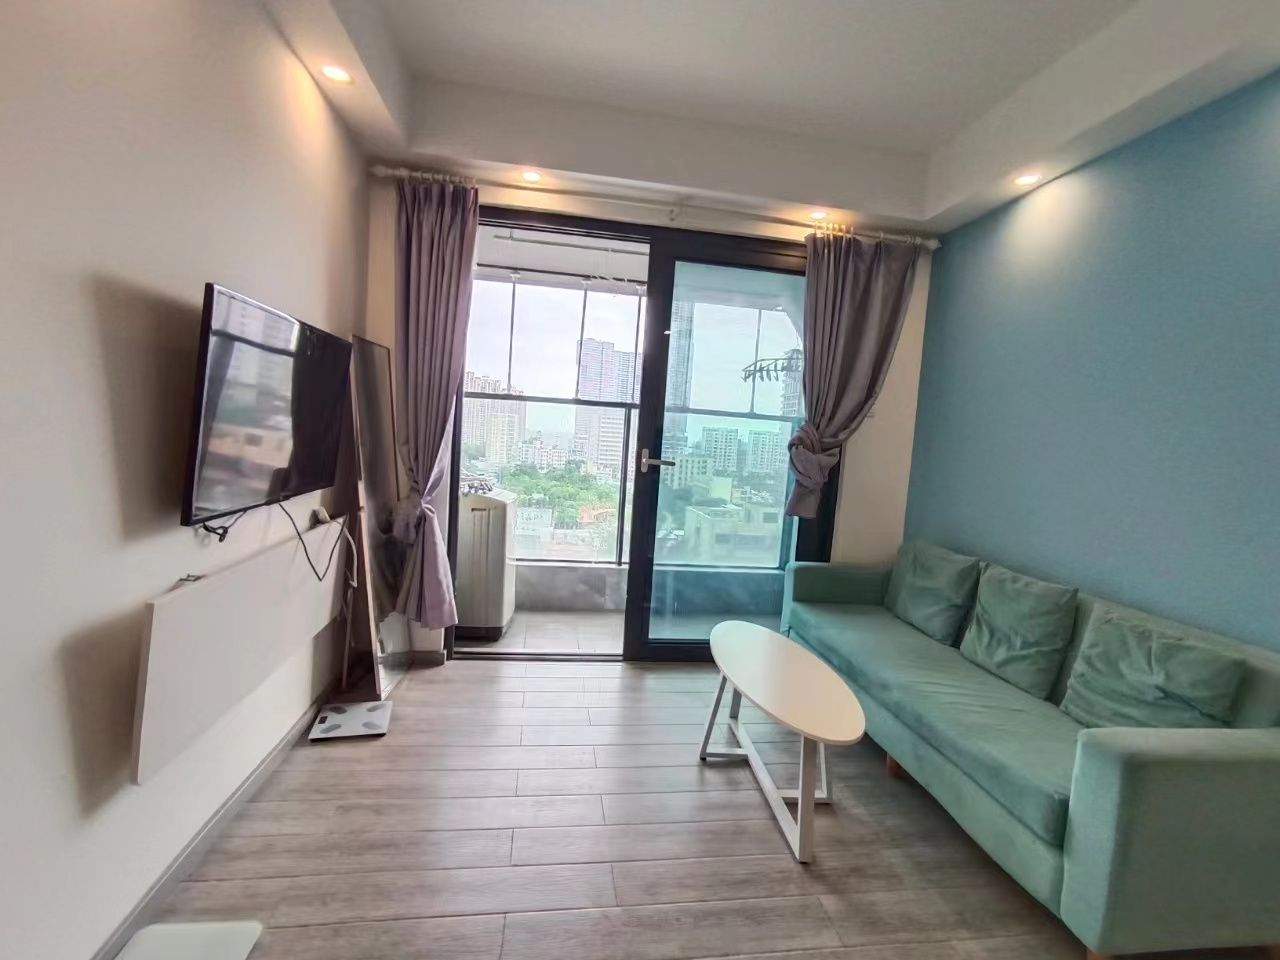 Featured image for “nearby Shenzhen Bay Park / downstair is Dongjiaotou metro station /2bedrooms at 7300”